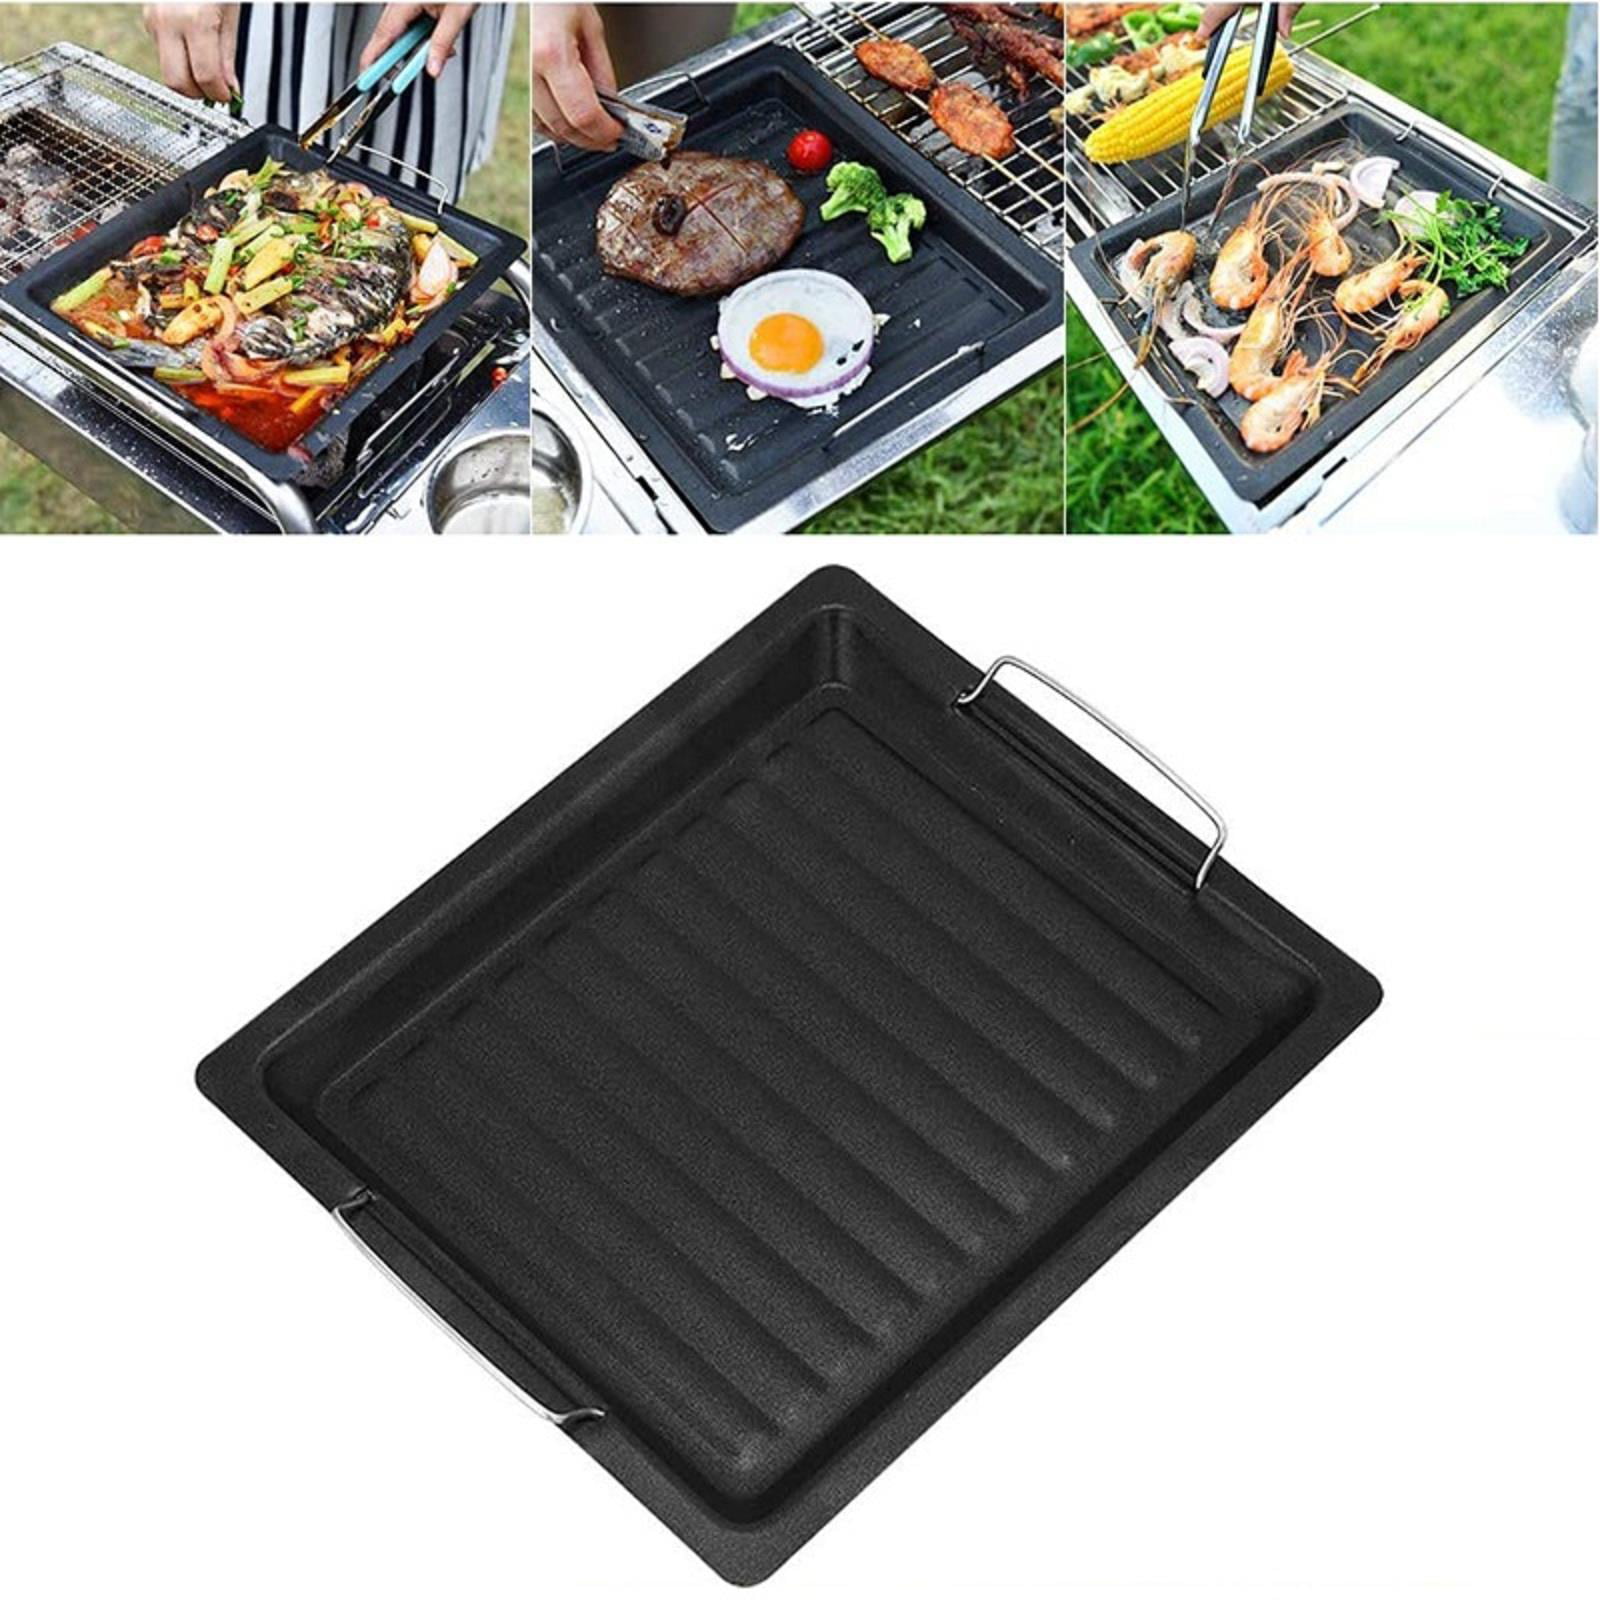  13.4 inches Korean BBQ Grill Pan with NonStick  Coating,Smokeless on Stove Round Griddle Pan with Handle for Home, Camping  and Outdoor Griddle(Blue): Home & Kitchen